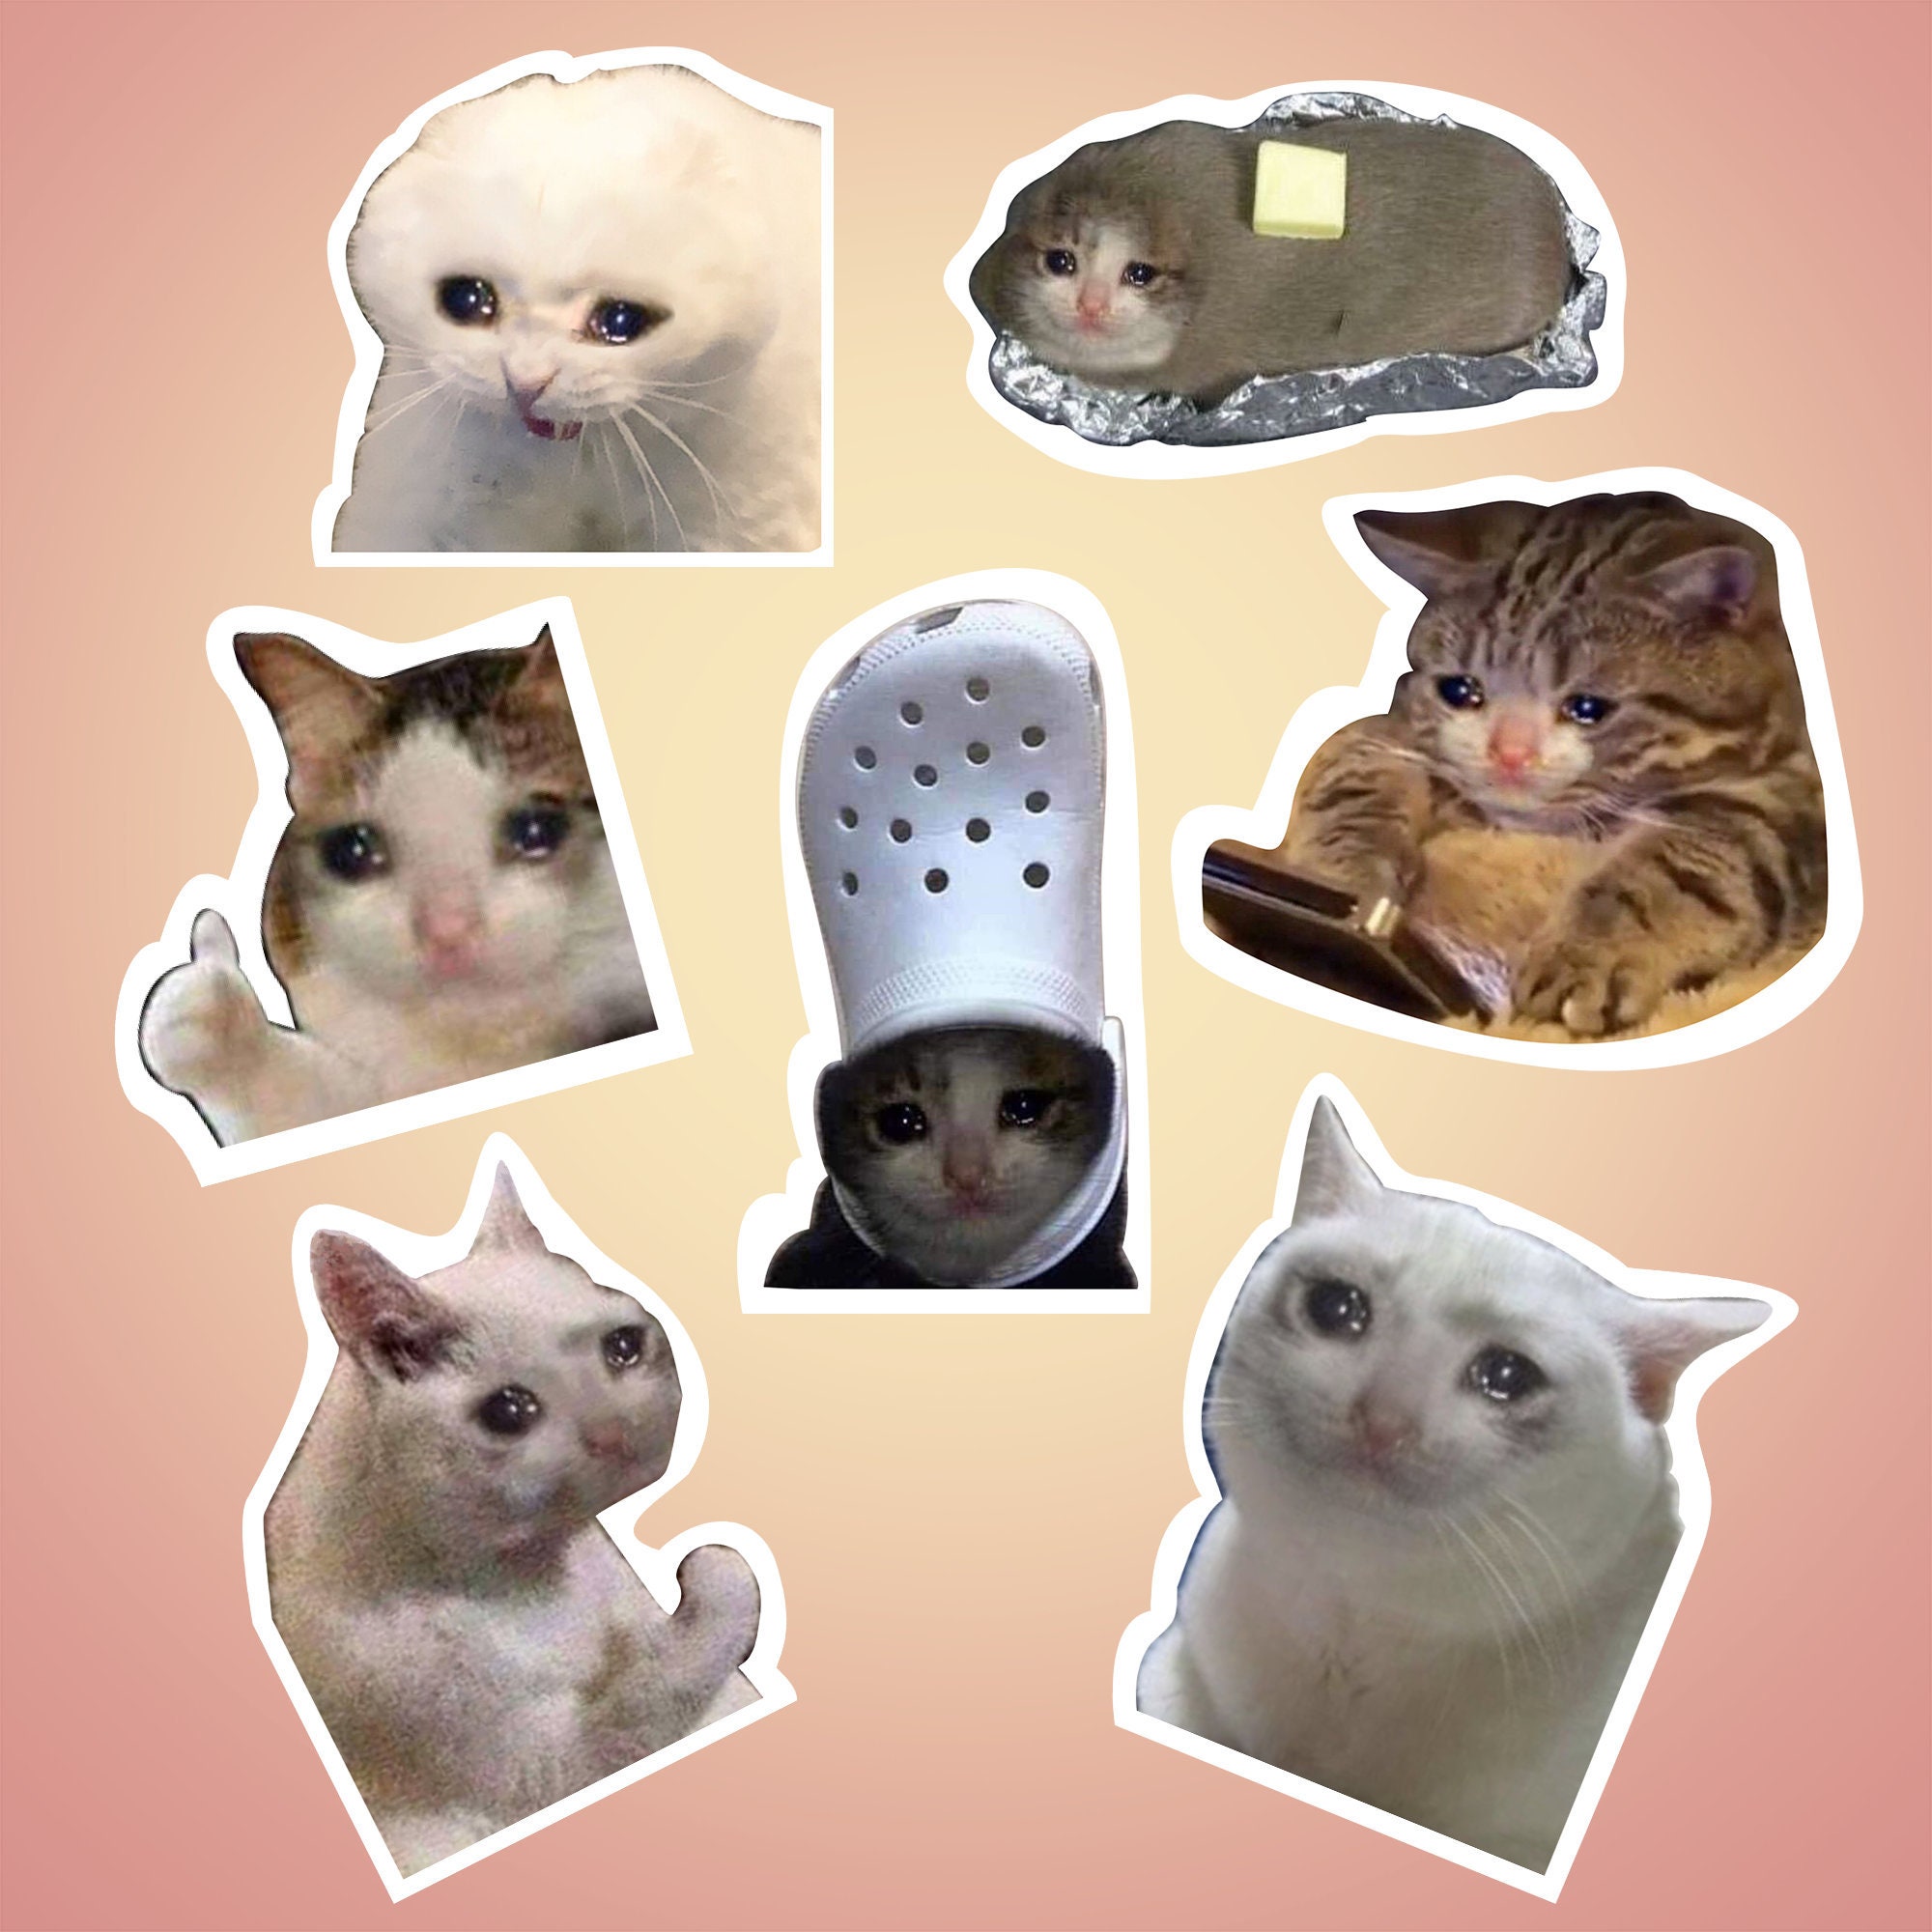 Crying Cat Sticker Pack Pack of 7 Meme Crying Cat Stickers - Etsy